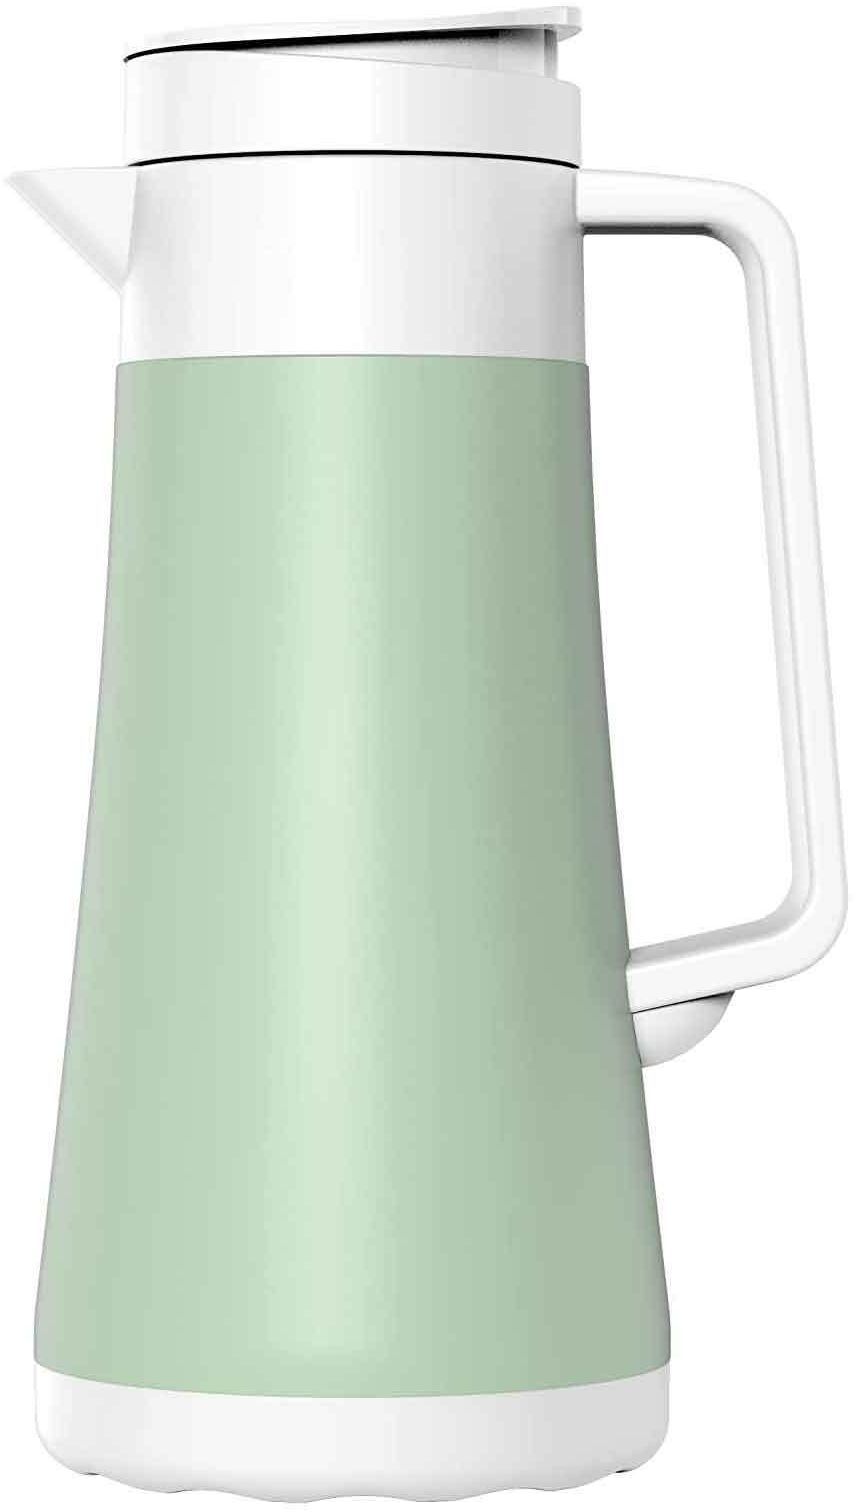 Penguen double wall stainless steel vacuum flask 0.6L green